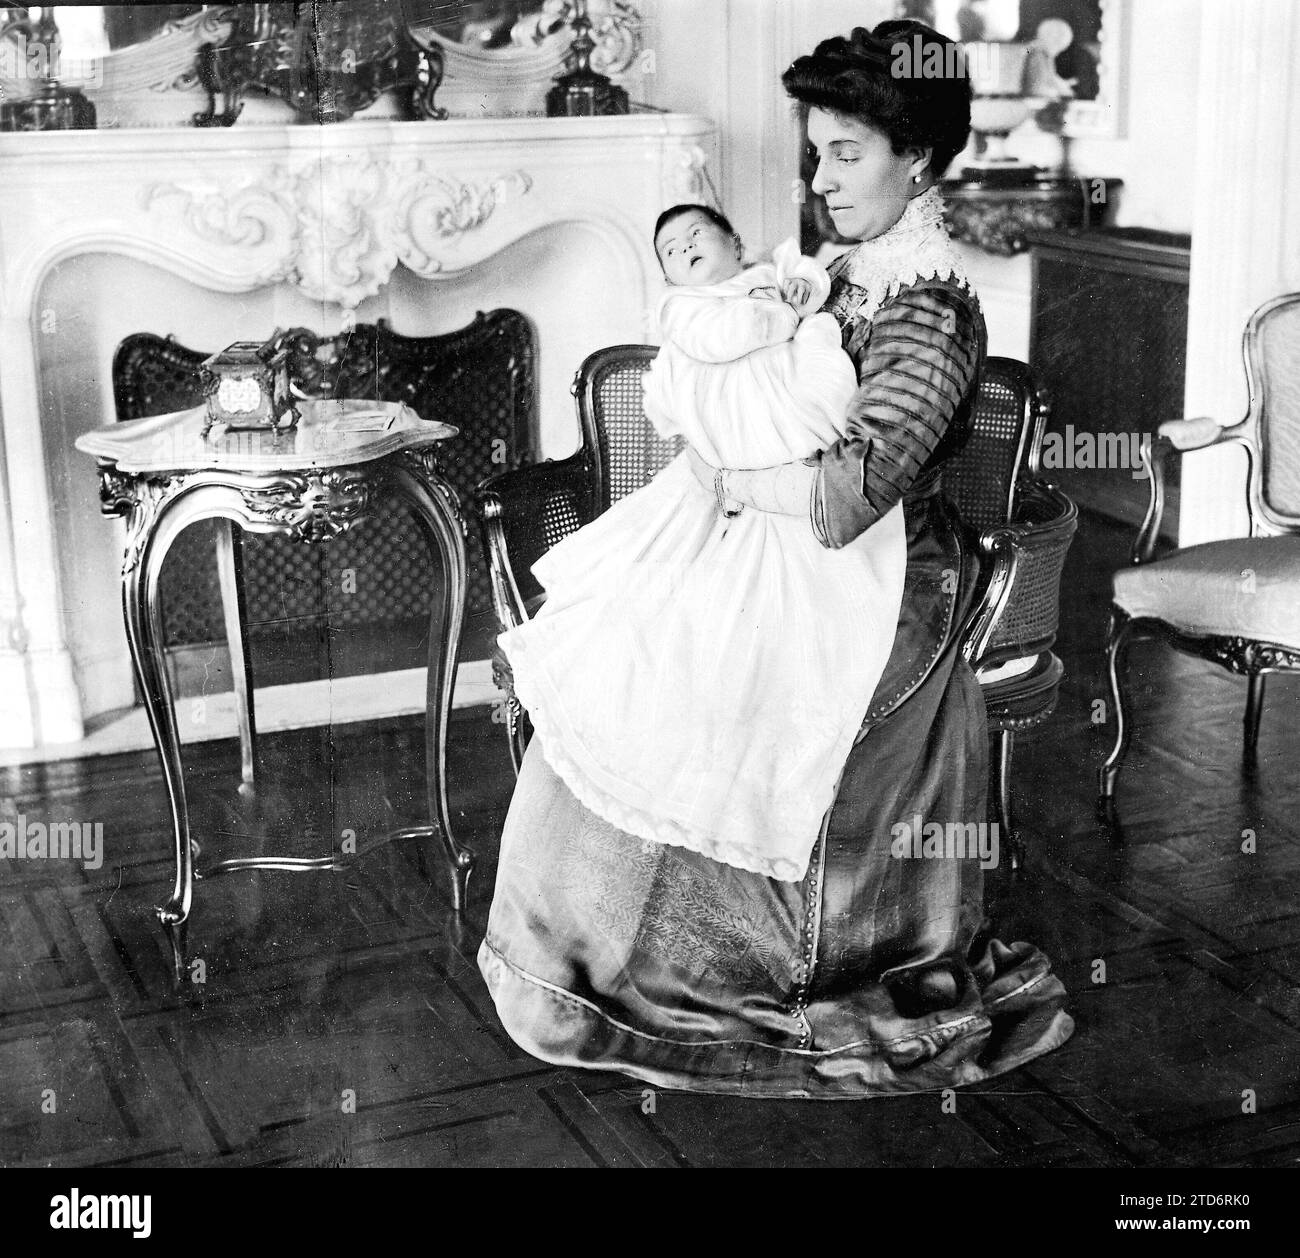 10/27/1911. From the royal family Her Highness the Infanta Doña María Teresa with her newborn daughter the Infantita Doña María de las Mercedes in her Lap. Credit: Album / Archivo ABC / Francisco Goñi Stock Photo